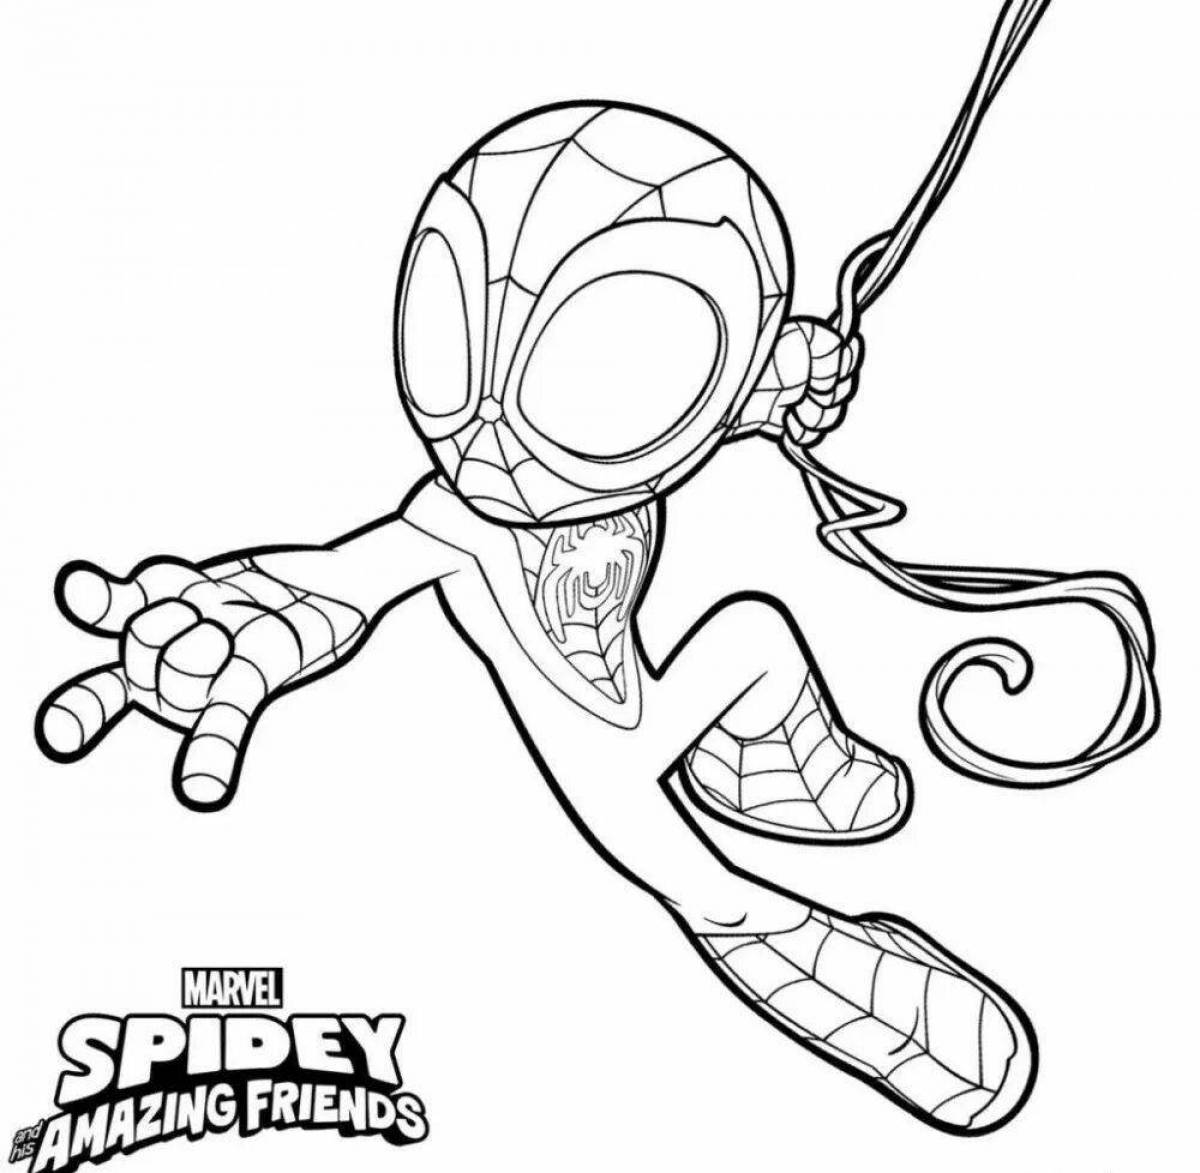 Exquisite cartoon spider coloring page